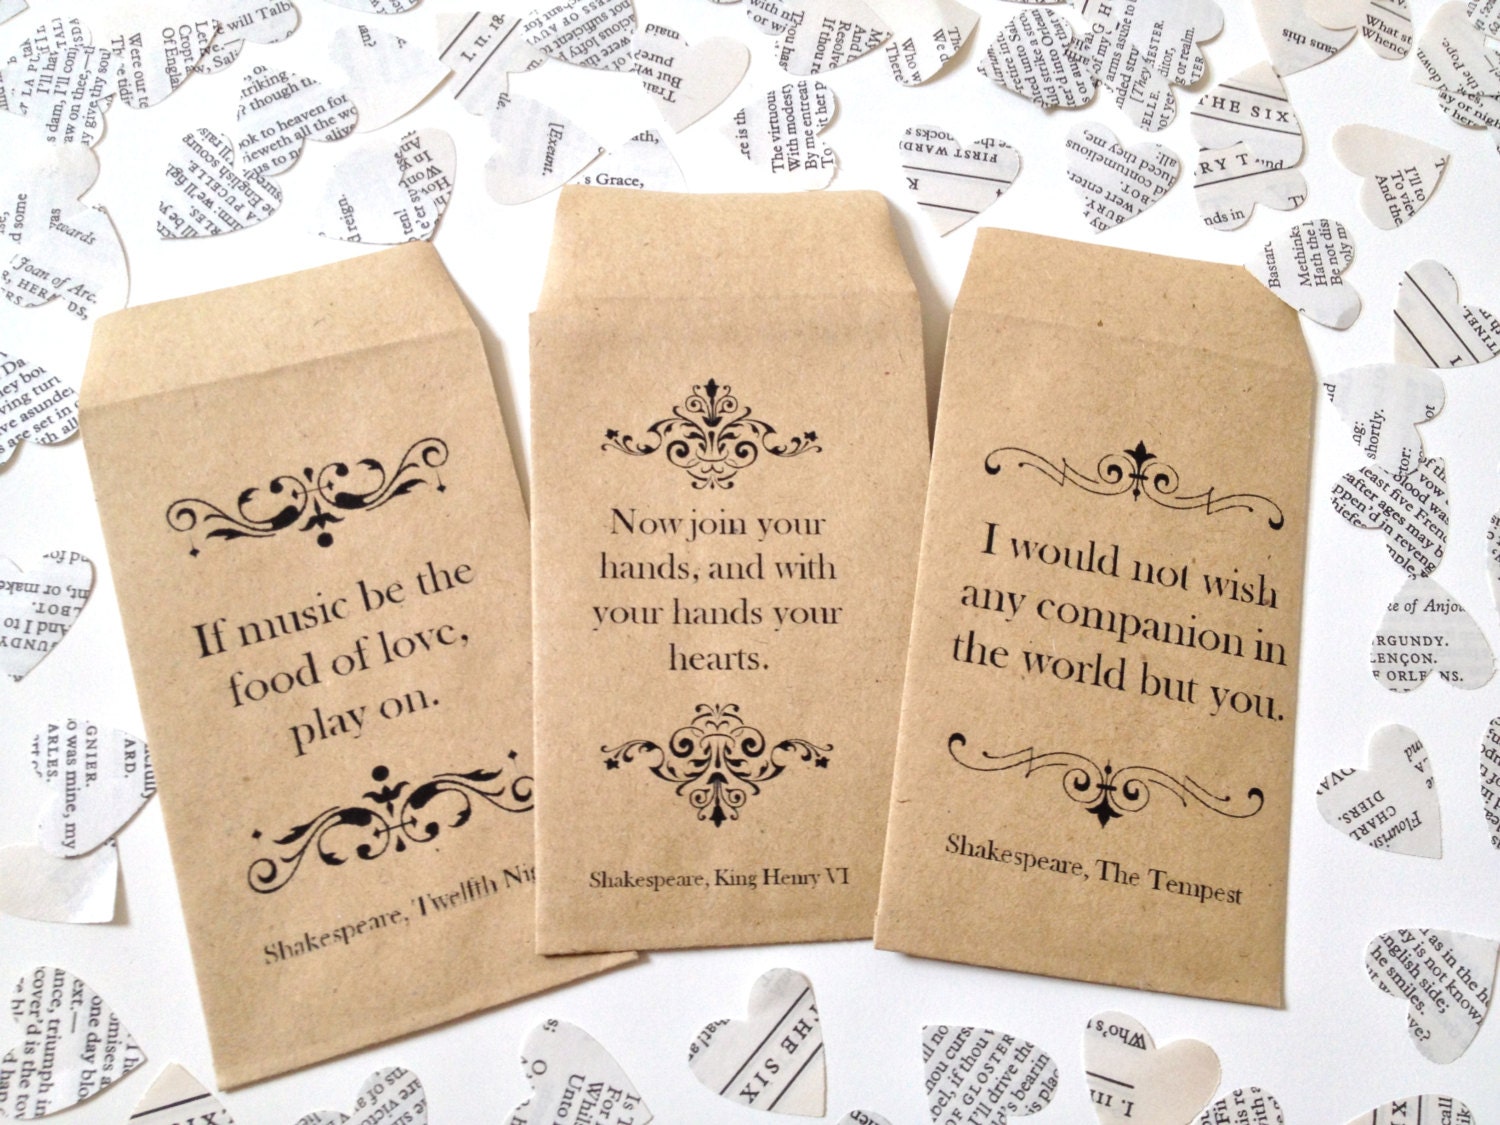 Shakespeare Book Confetti for Vintage Wedding